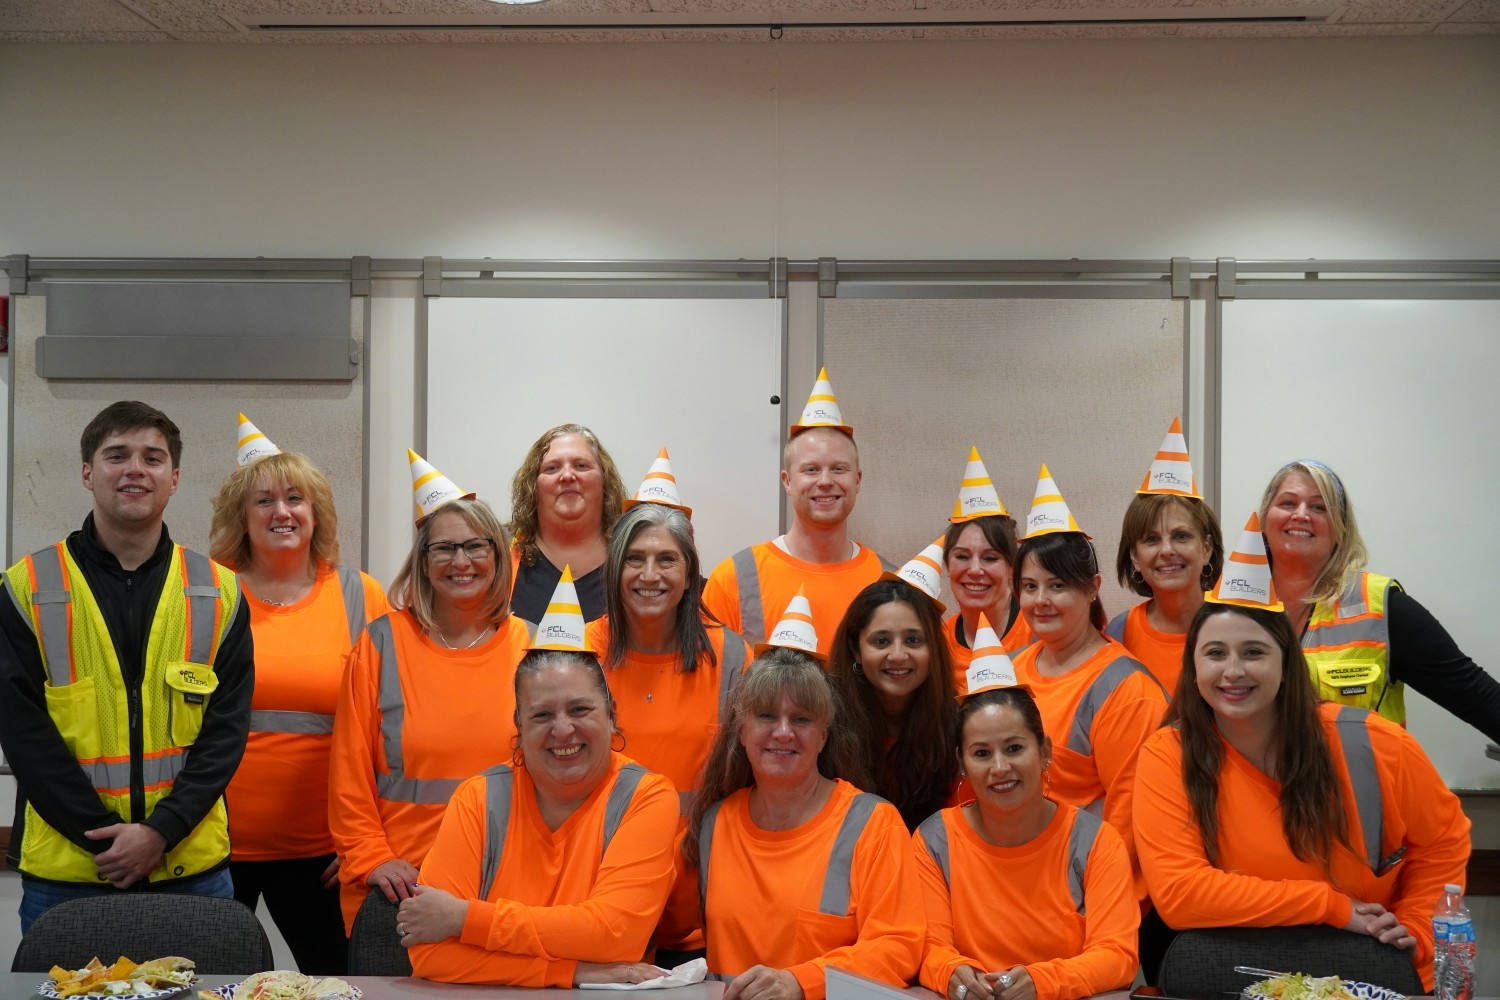 Halloween Accounting Team Safety Cones